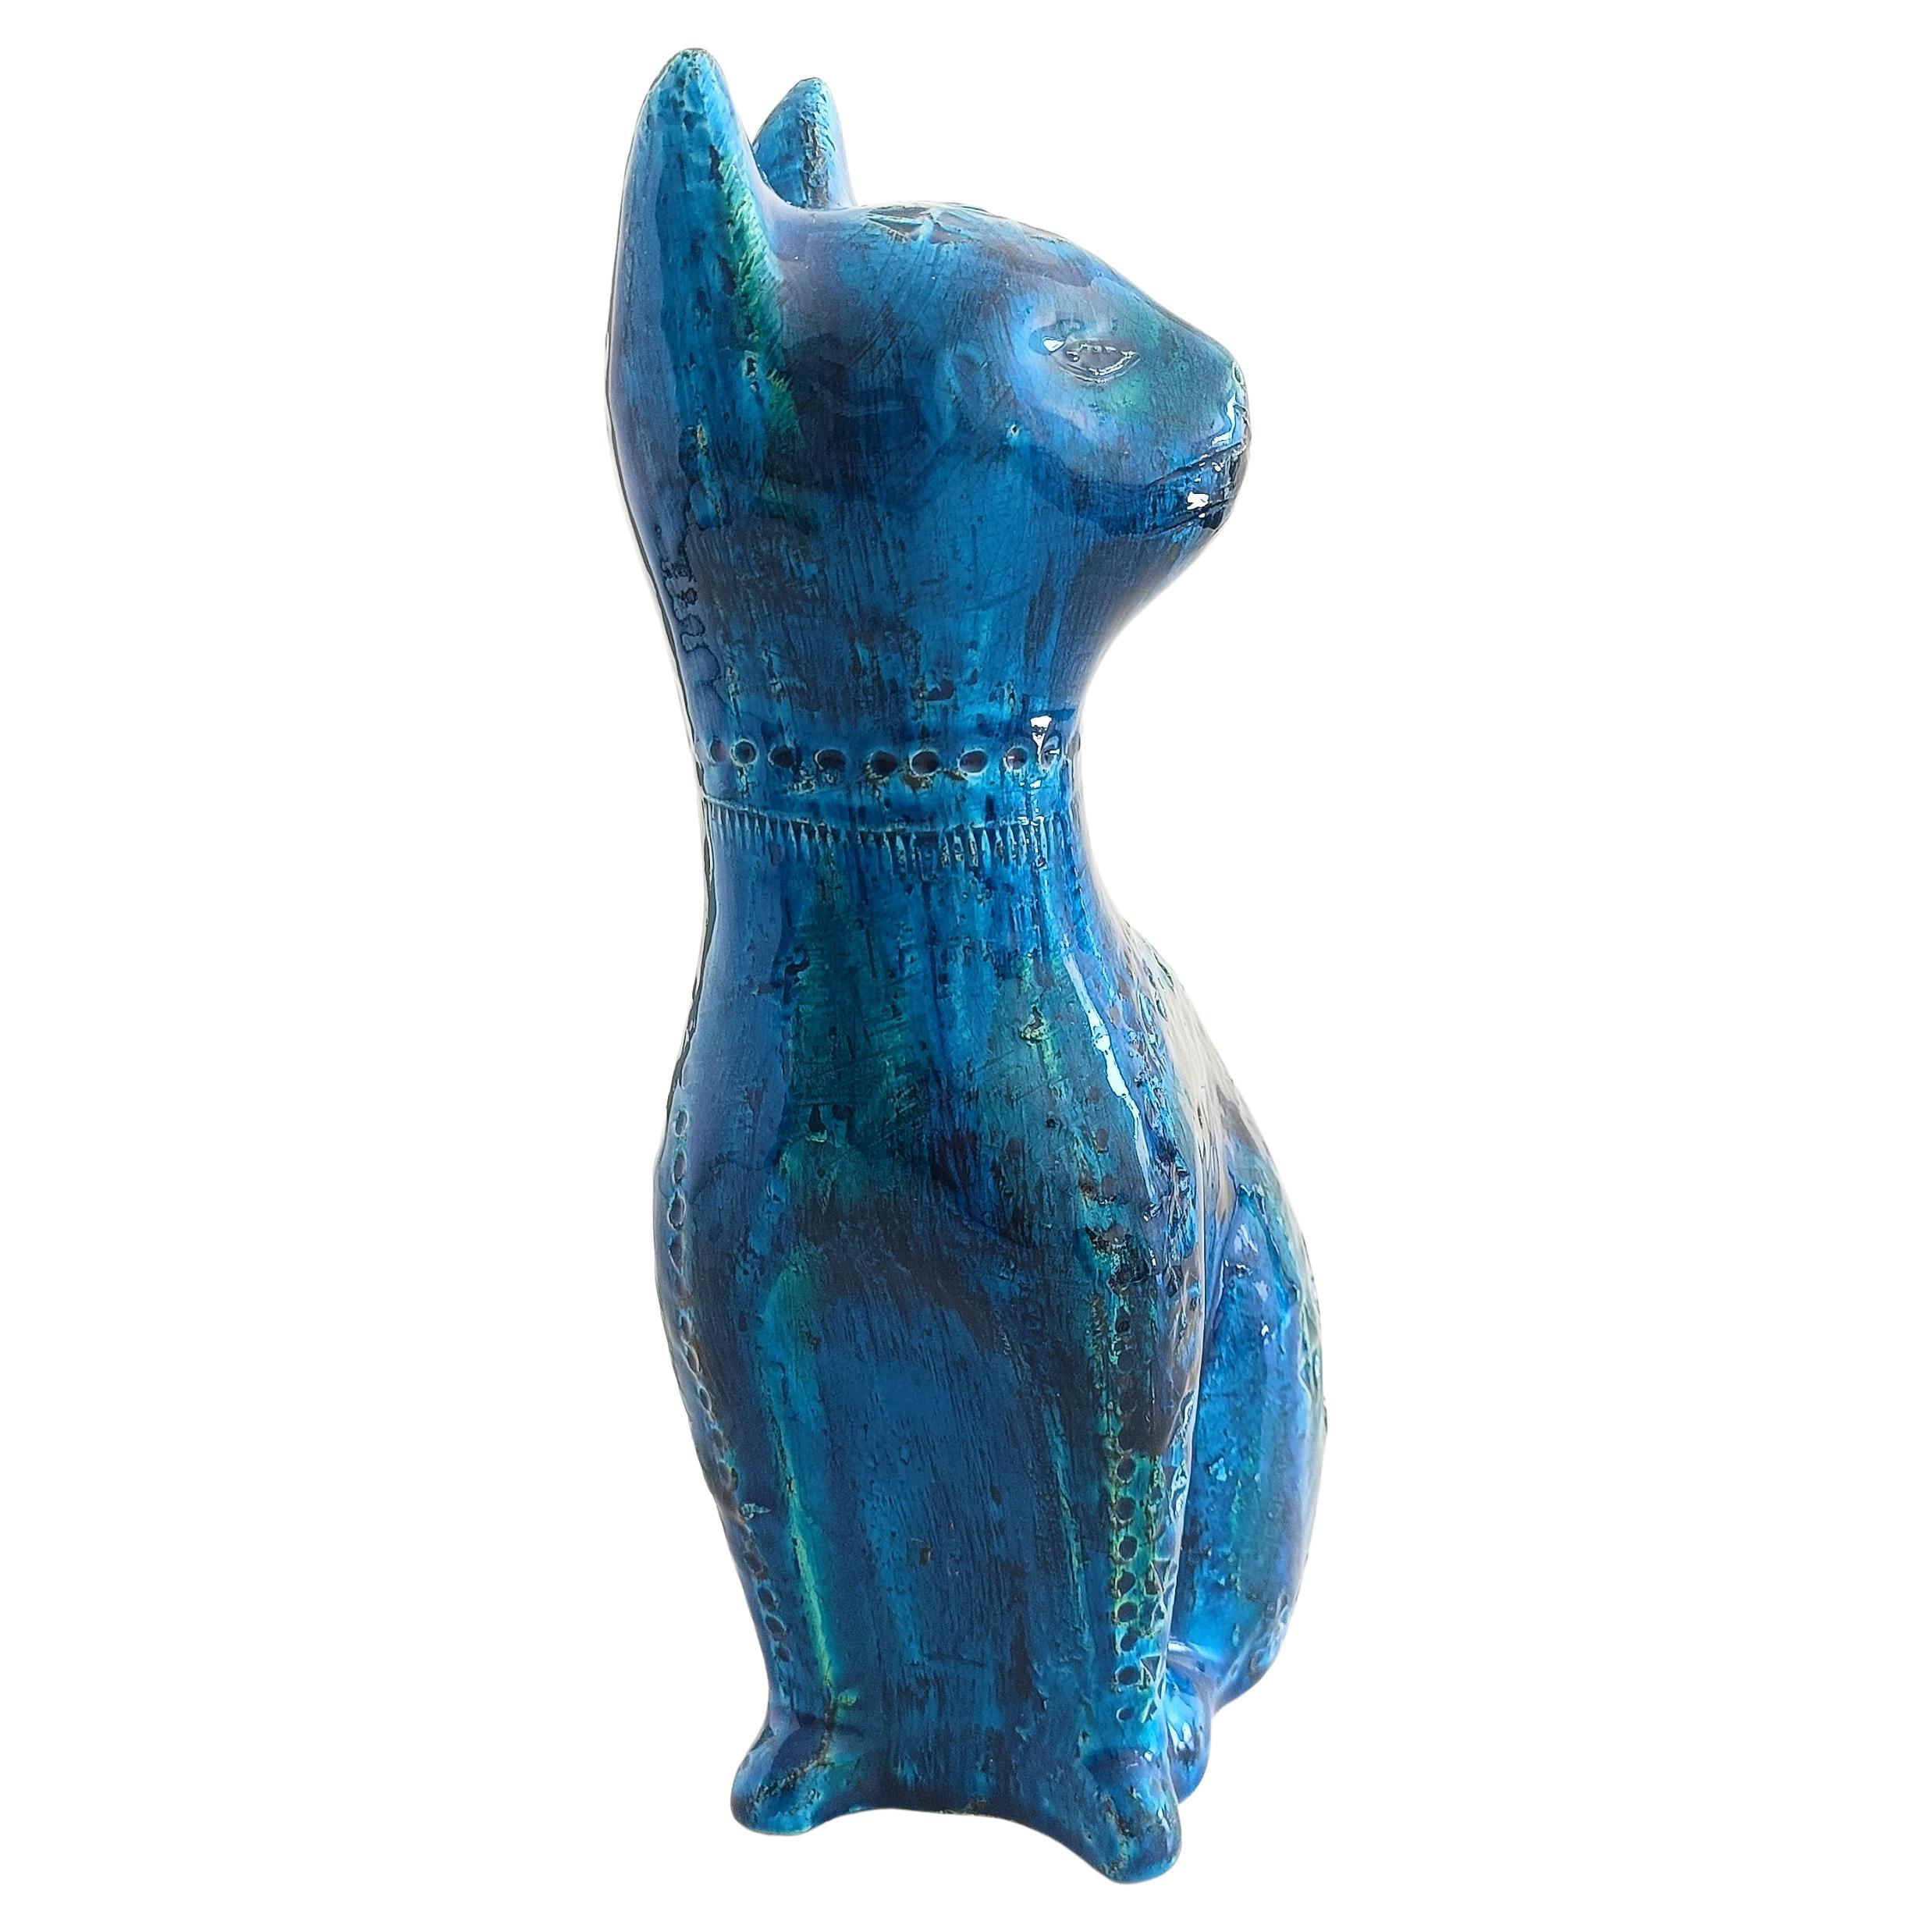 This Bitossi large ceramic cat sculpture by Aldo Londi is a stunning example of Mid-Century Italian pottery. Handcrafted in Italy during the 1960s, it showcases the beautiful  Rimini Blu decor, so characteristic of the Bitossi ceramic studio.

Aldo